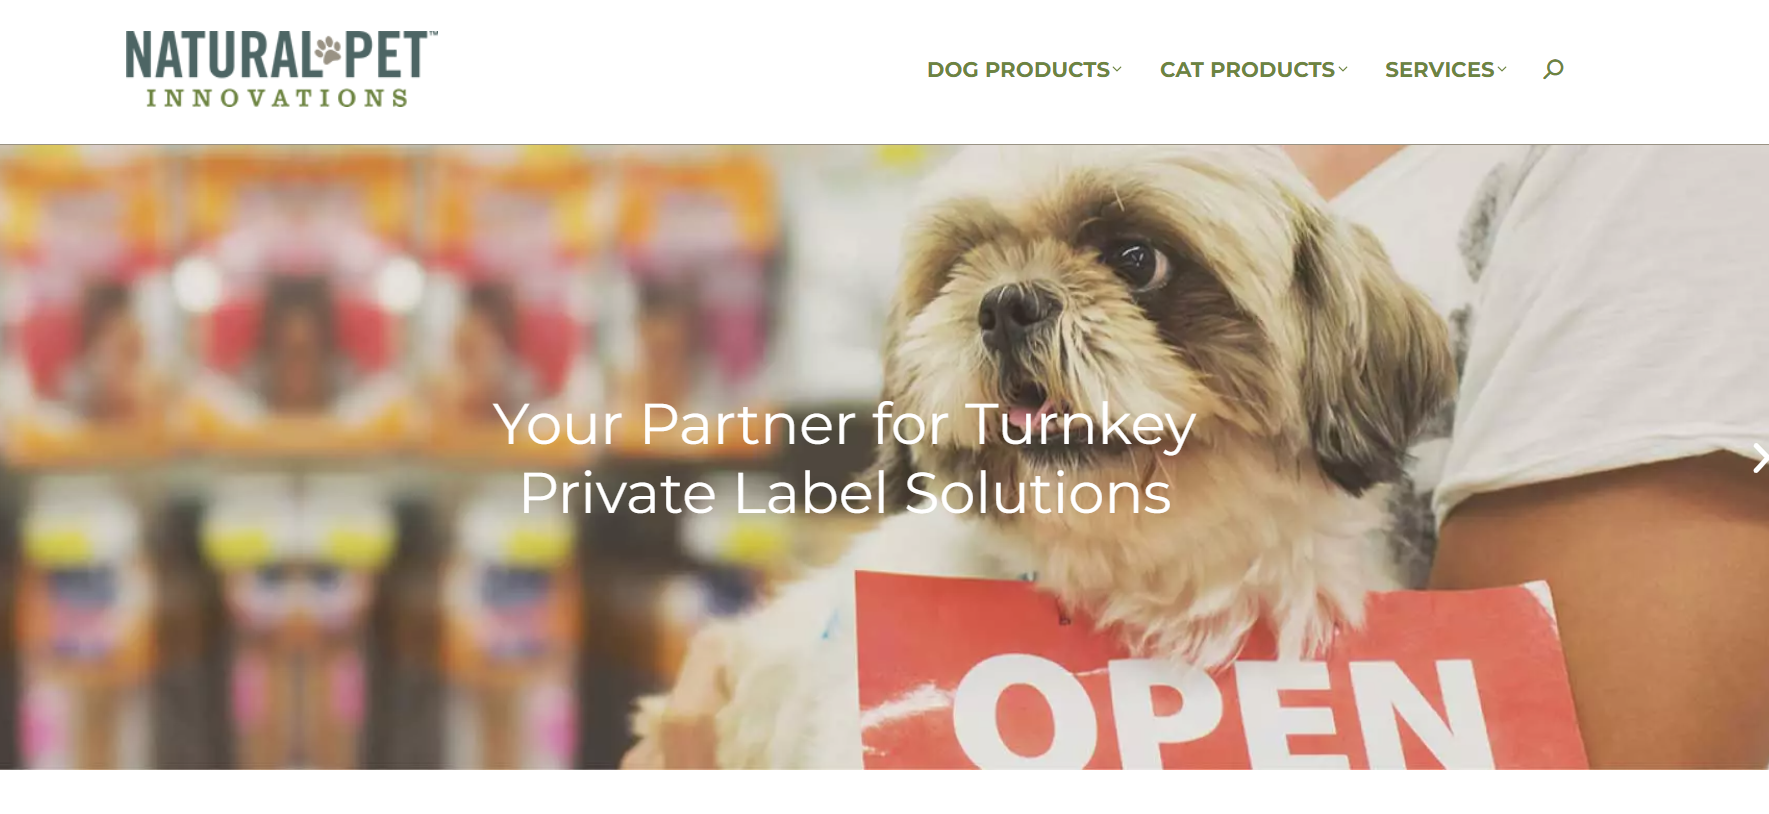 Natural Pet Innovations, based in the United States, manufactures pet products suitable for private label dropshipping. 